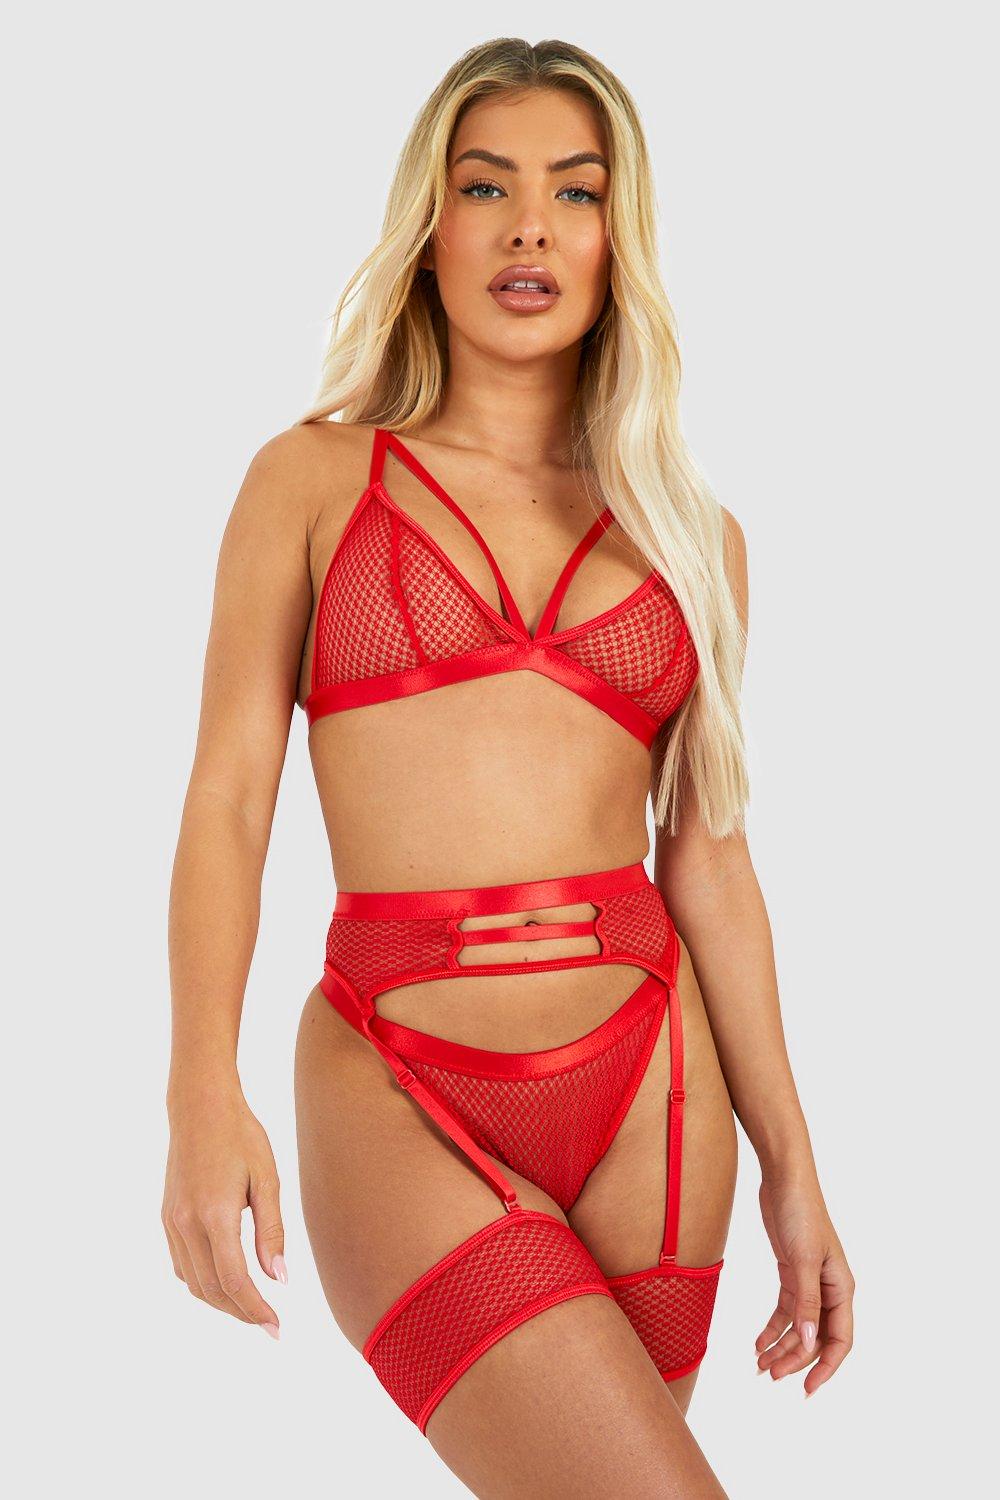 Strapping Underwire Bra Thong And Suspender Set